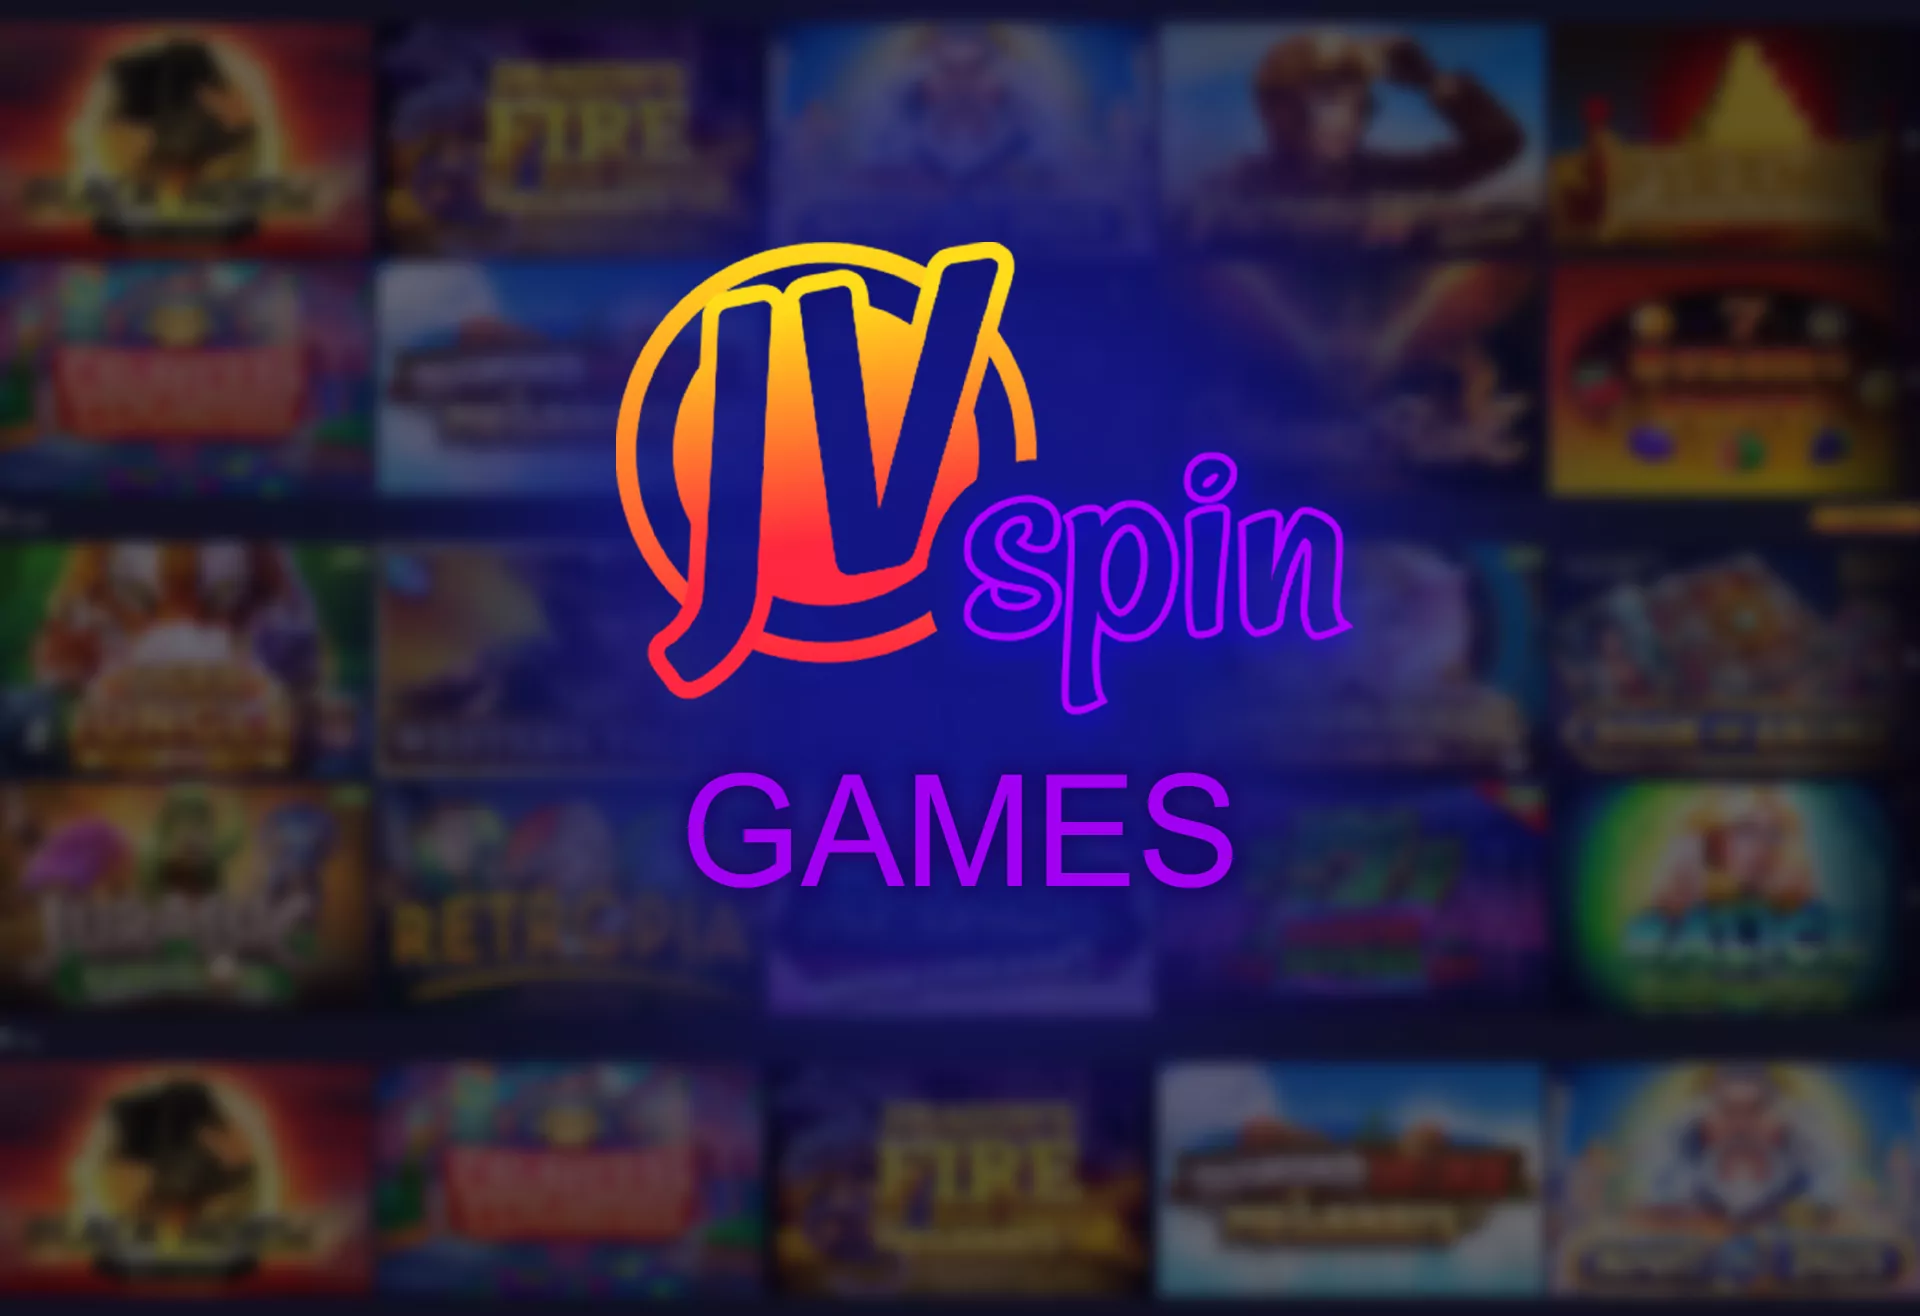 On the JVSpin Casino, you find lots of slots and mini-games.